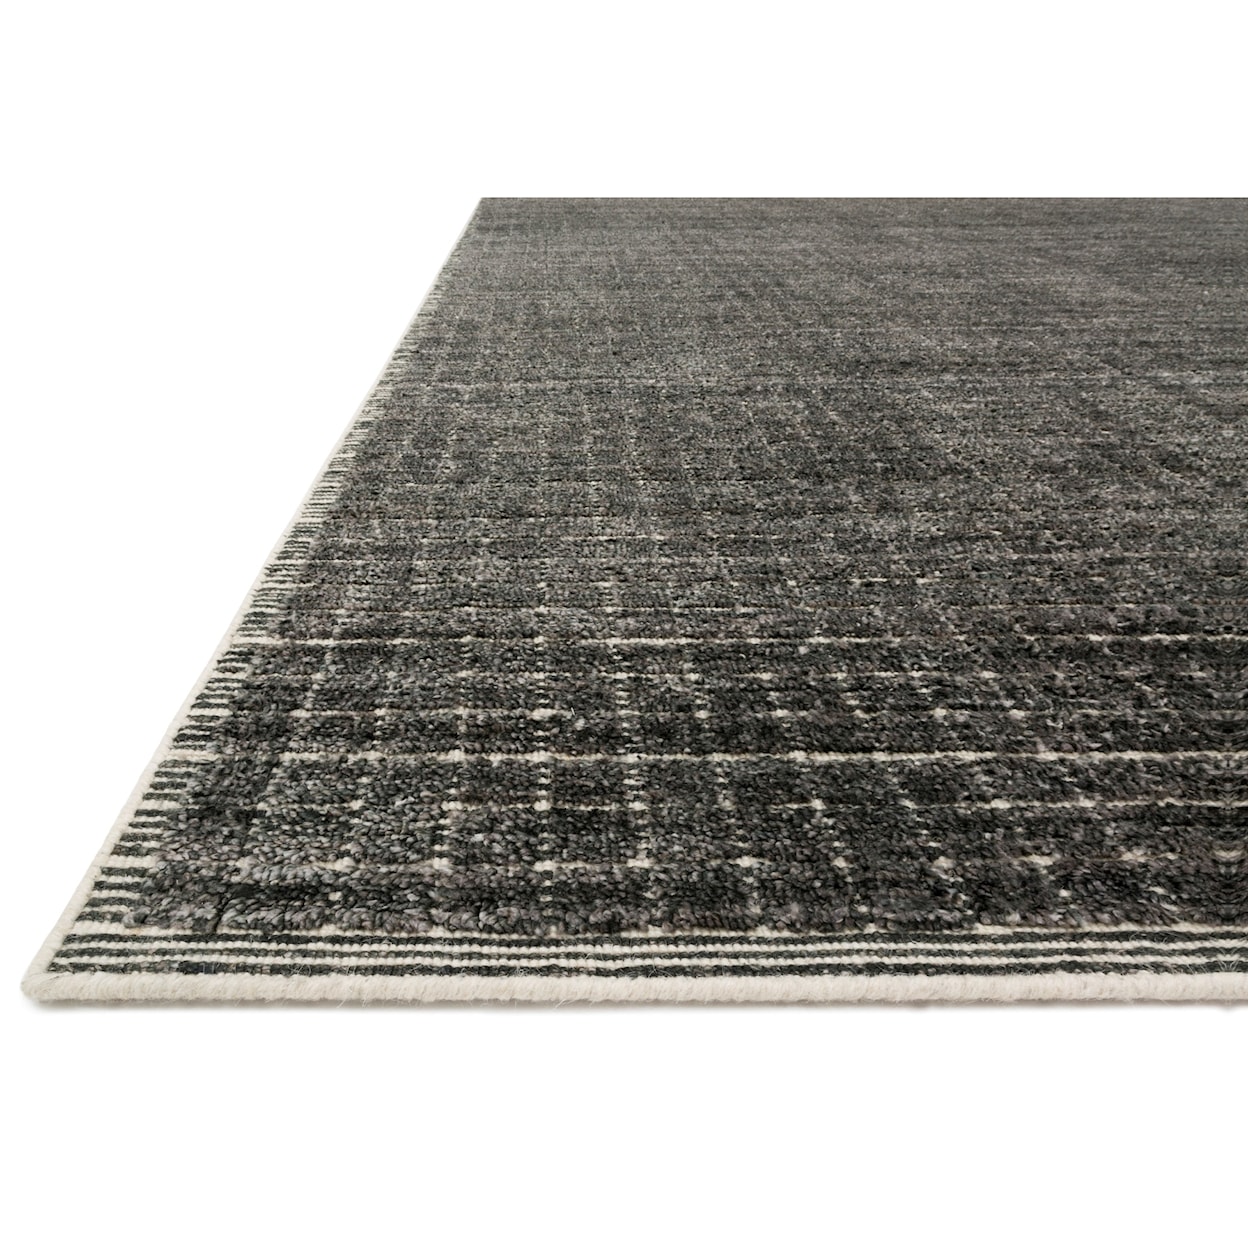 Loloi Rugs Beverly 9'6" x 13'6" Charcoal Rug